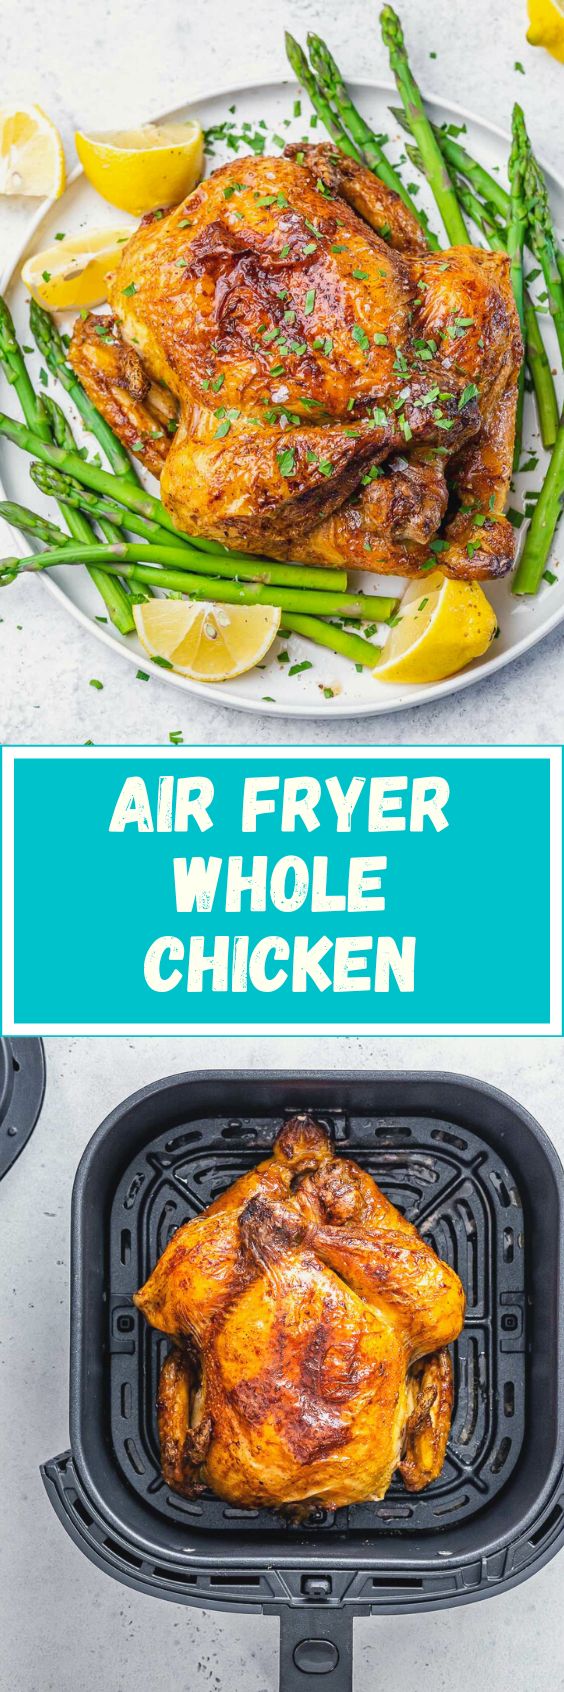 Air Fryer Whole Chicken - Carmy - Easy Healthy-ish Recipes